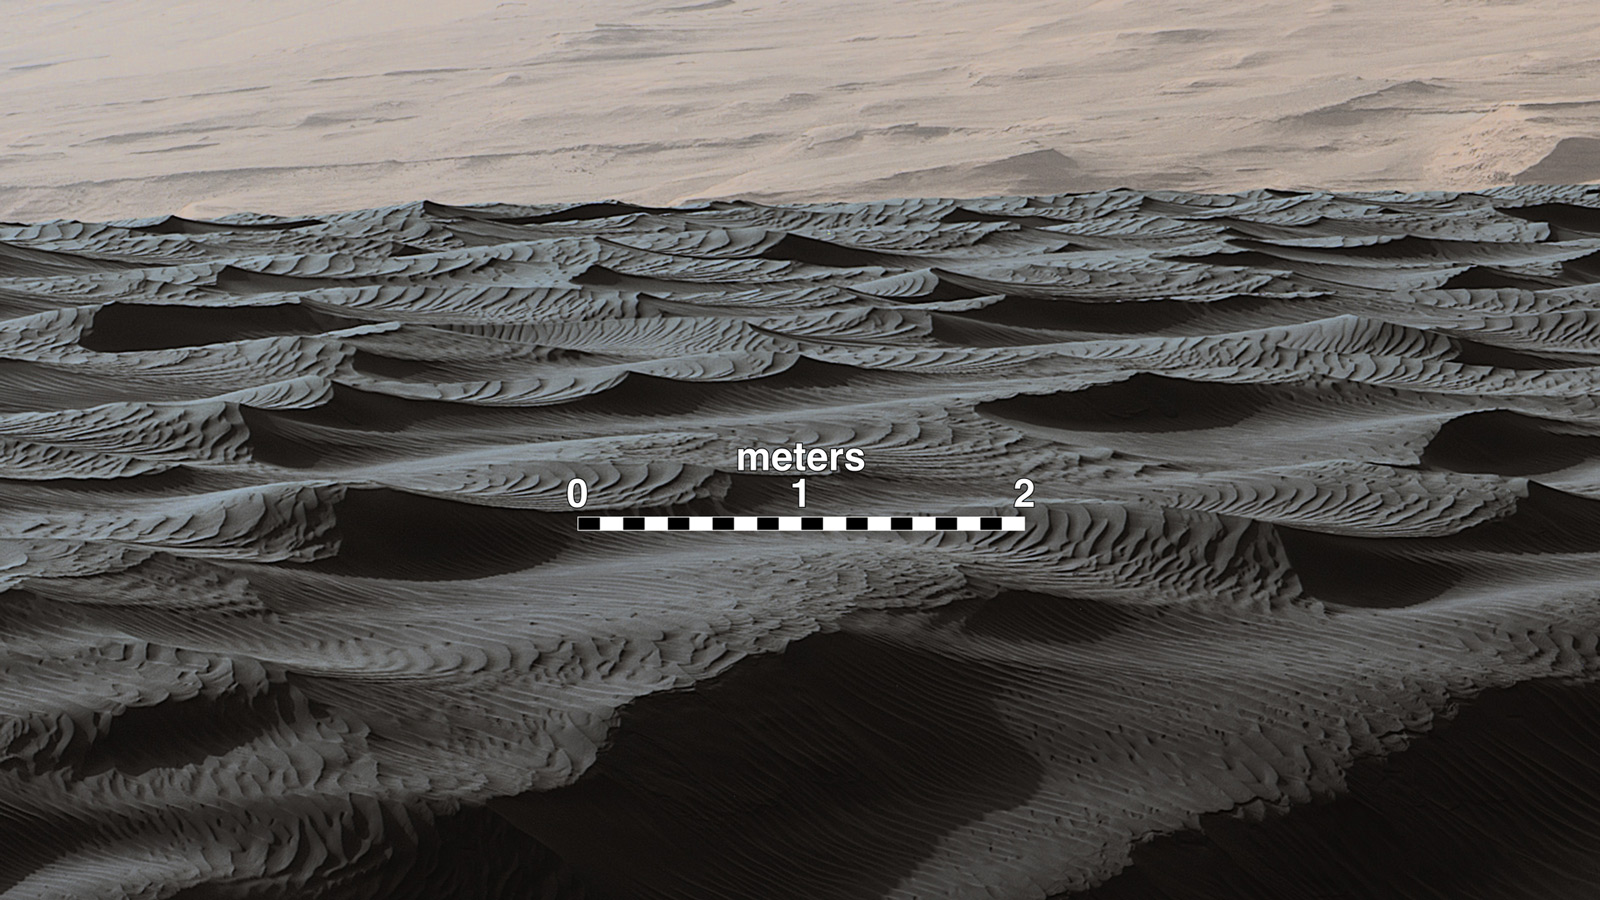 Image of Sand Dunes on Mars: Endurance Craters are dramatic dune fields on the crater floor. Dune crests have accumulated more dust than the flanks of the dunes and the flat surfaces between the dunes.